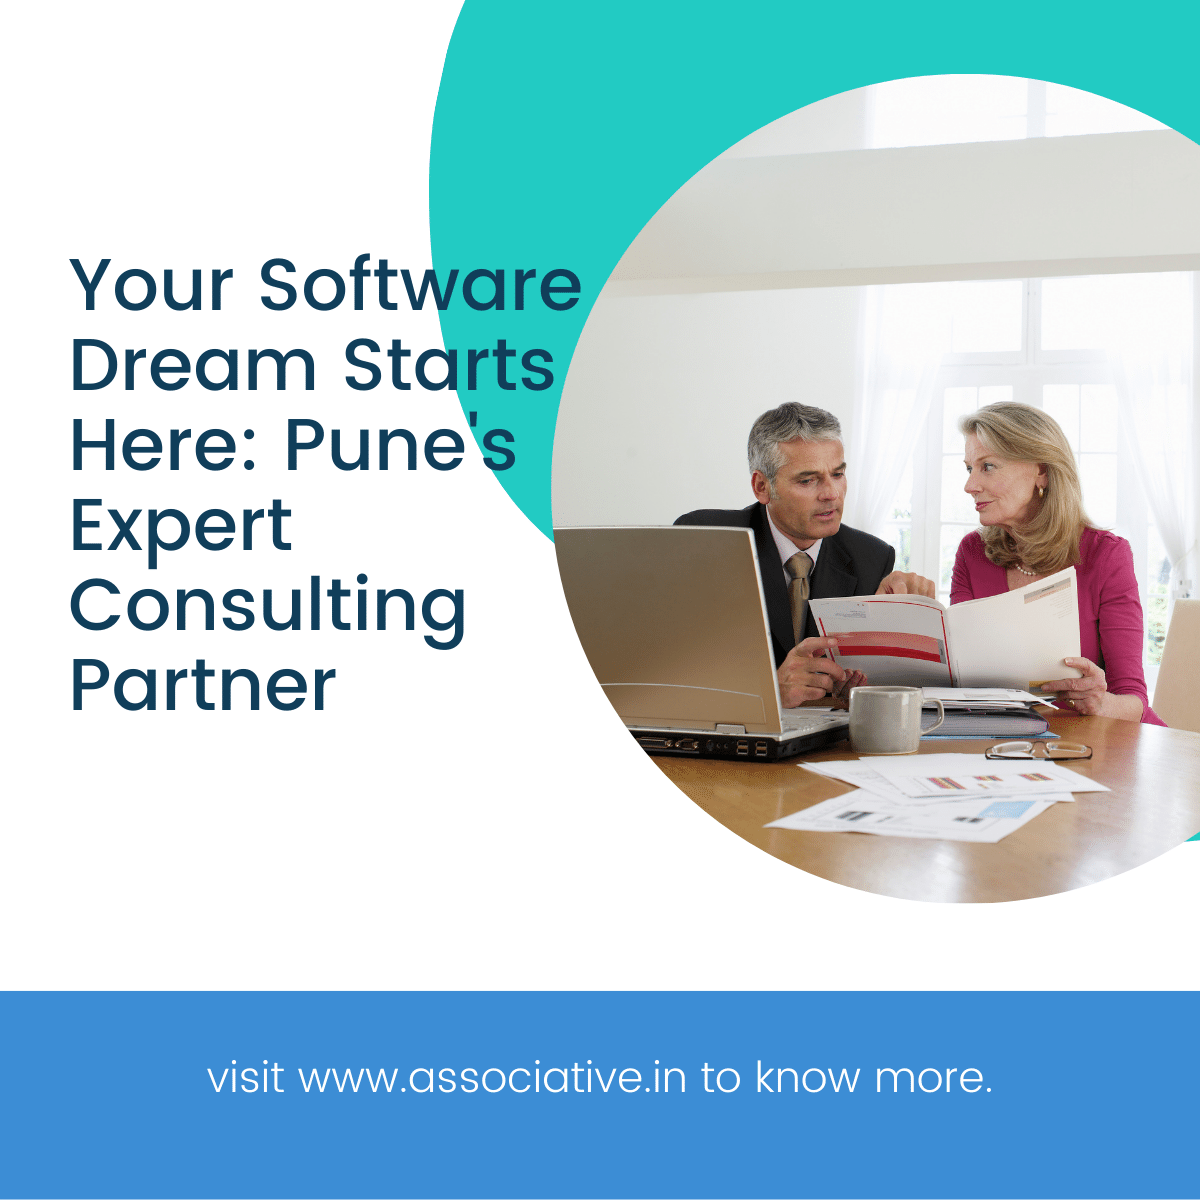 Your Software Dream Starts Here: Pune's Expert Consulting Partner